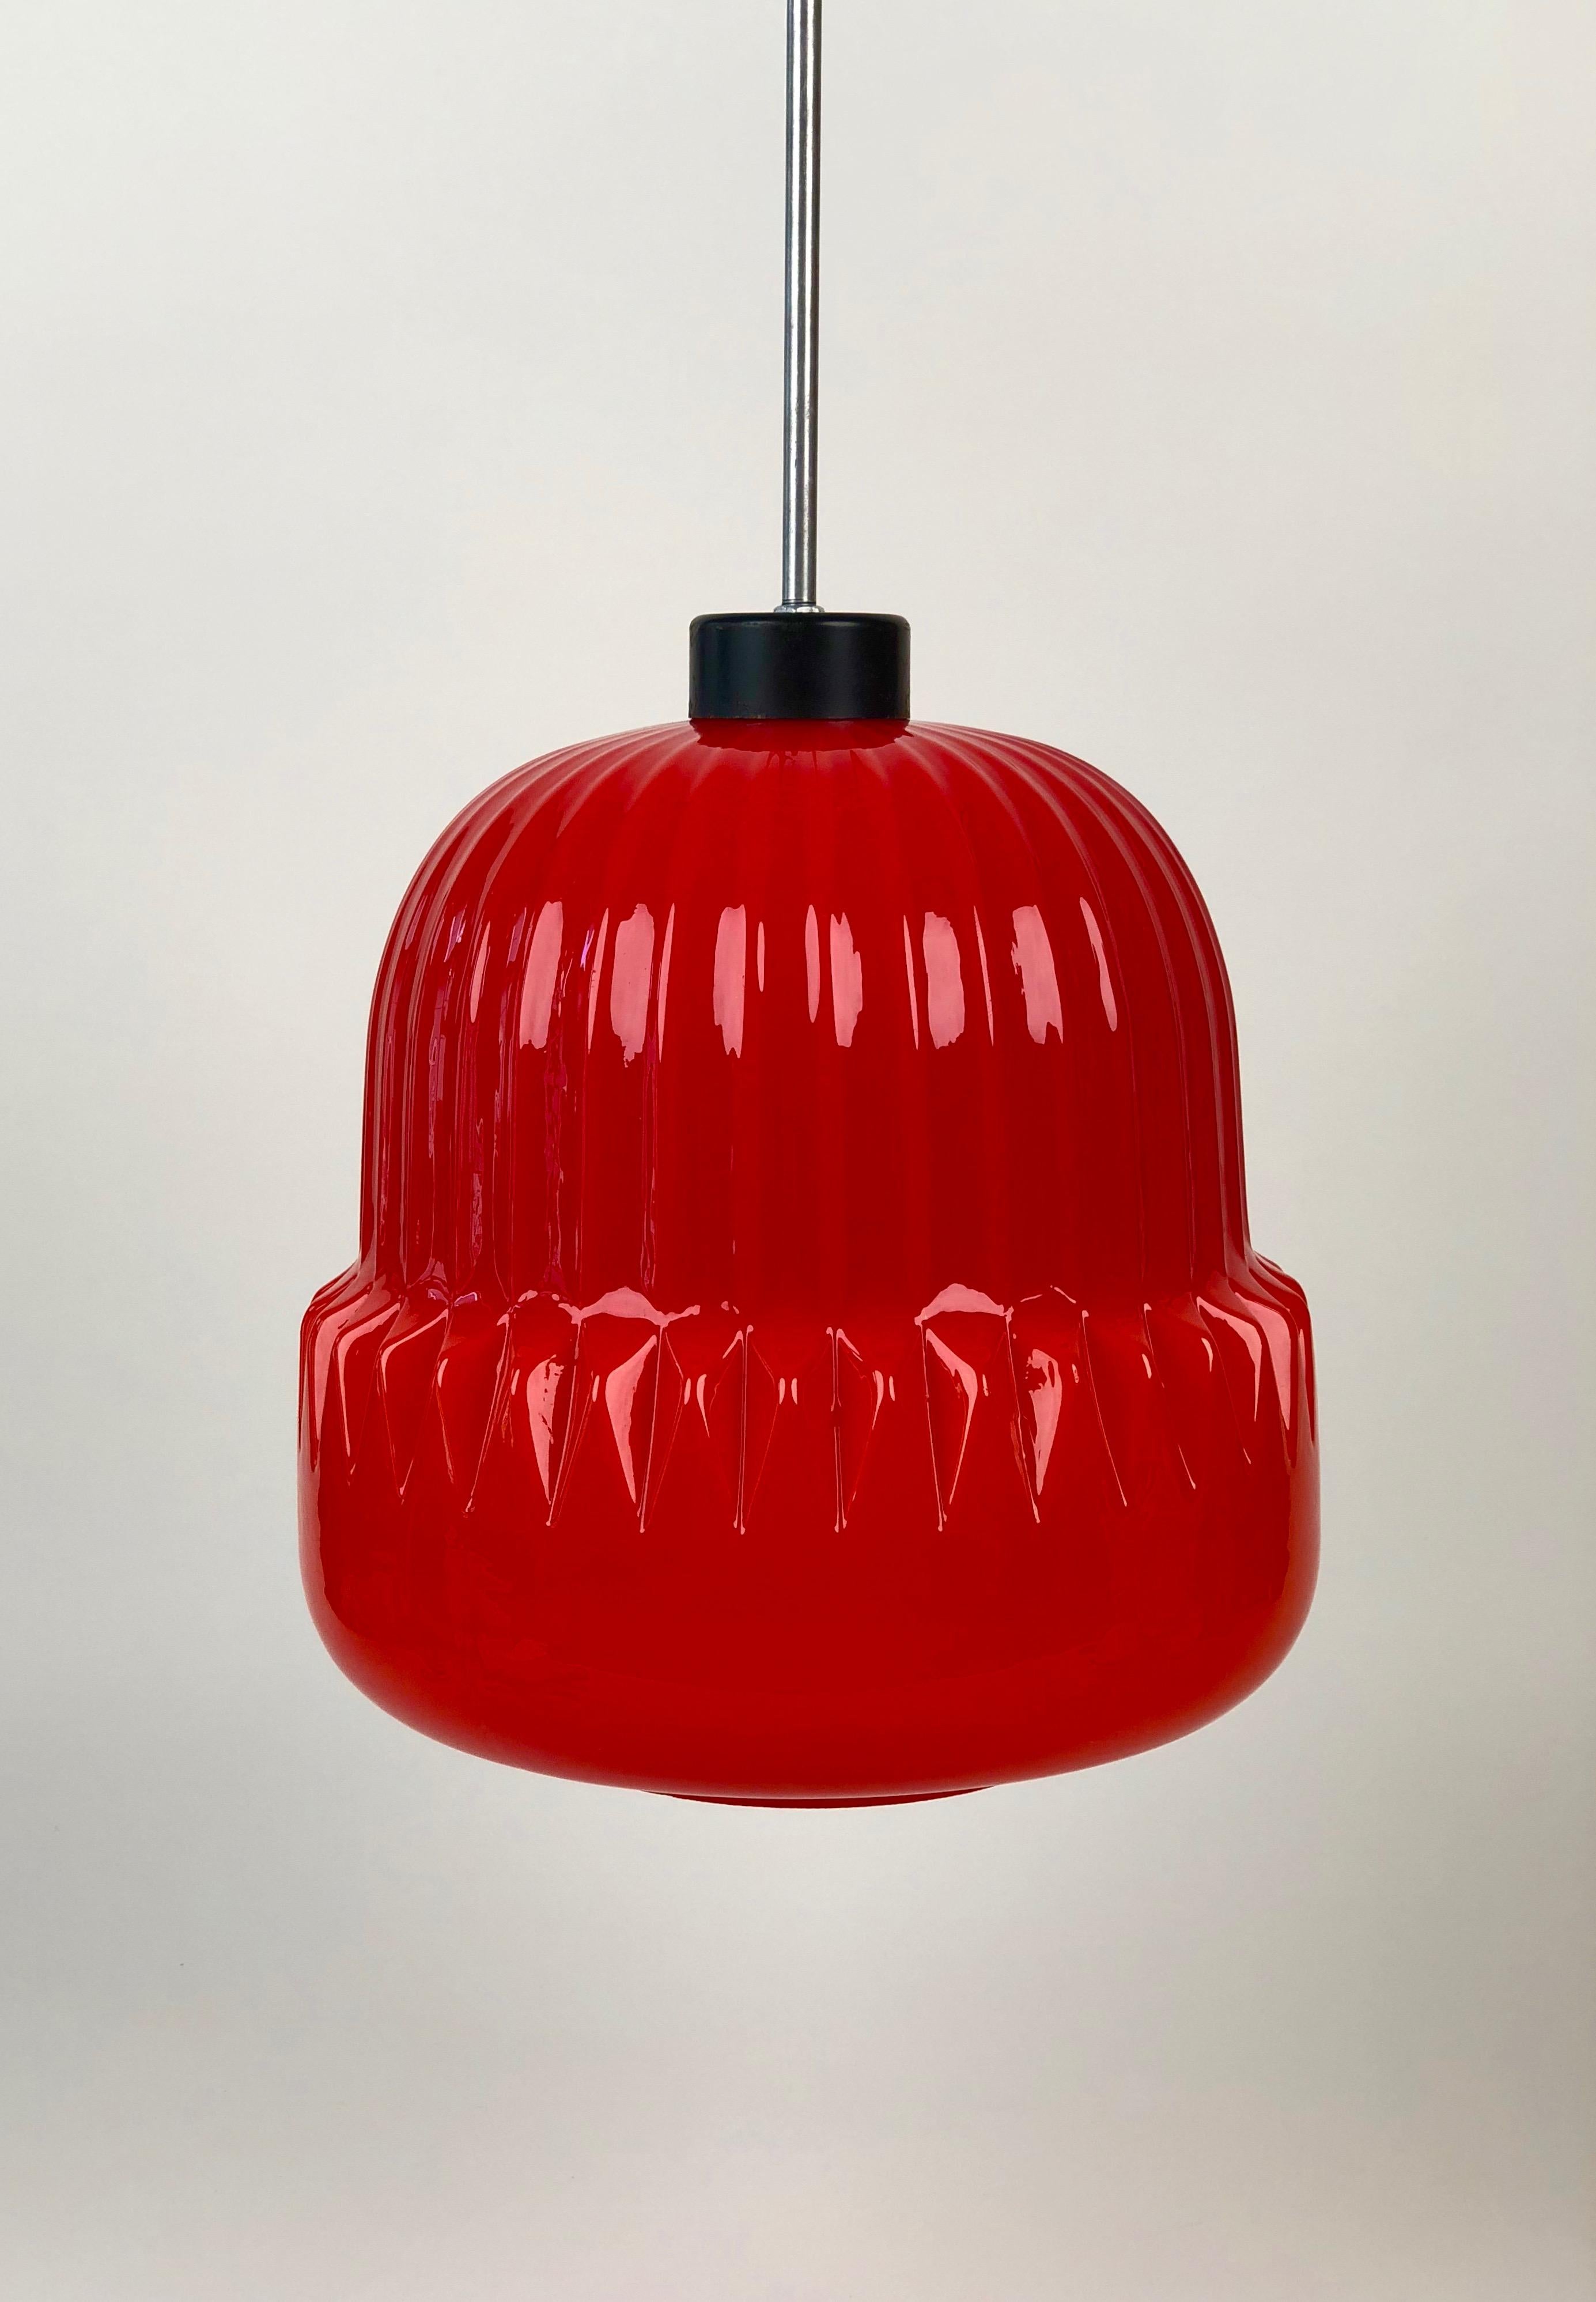 A very unique early 1960s pendant lamp, made in Czechoslovakia. The red glass shade has a
fluted pattern moulded into the glass form. The light emitted is warm and intense. It glows. I hope
that I have achieved an accurate color, so that I can